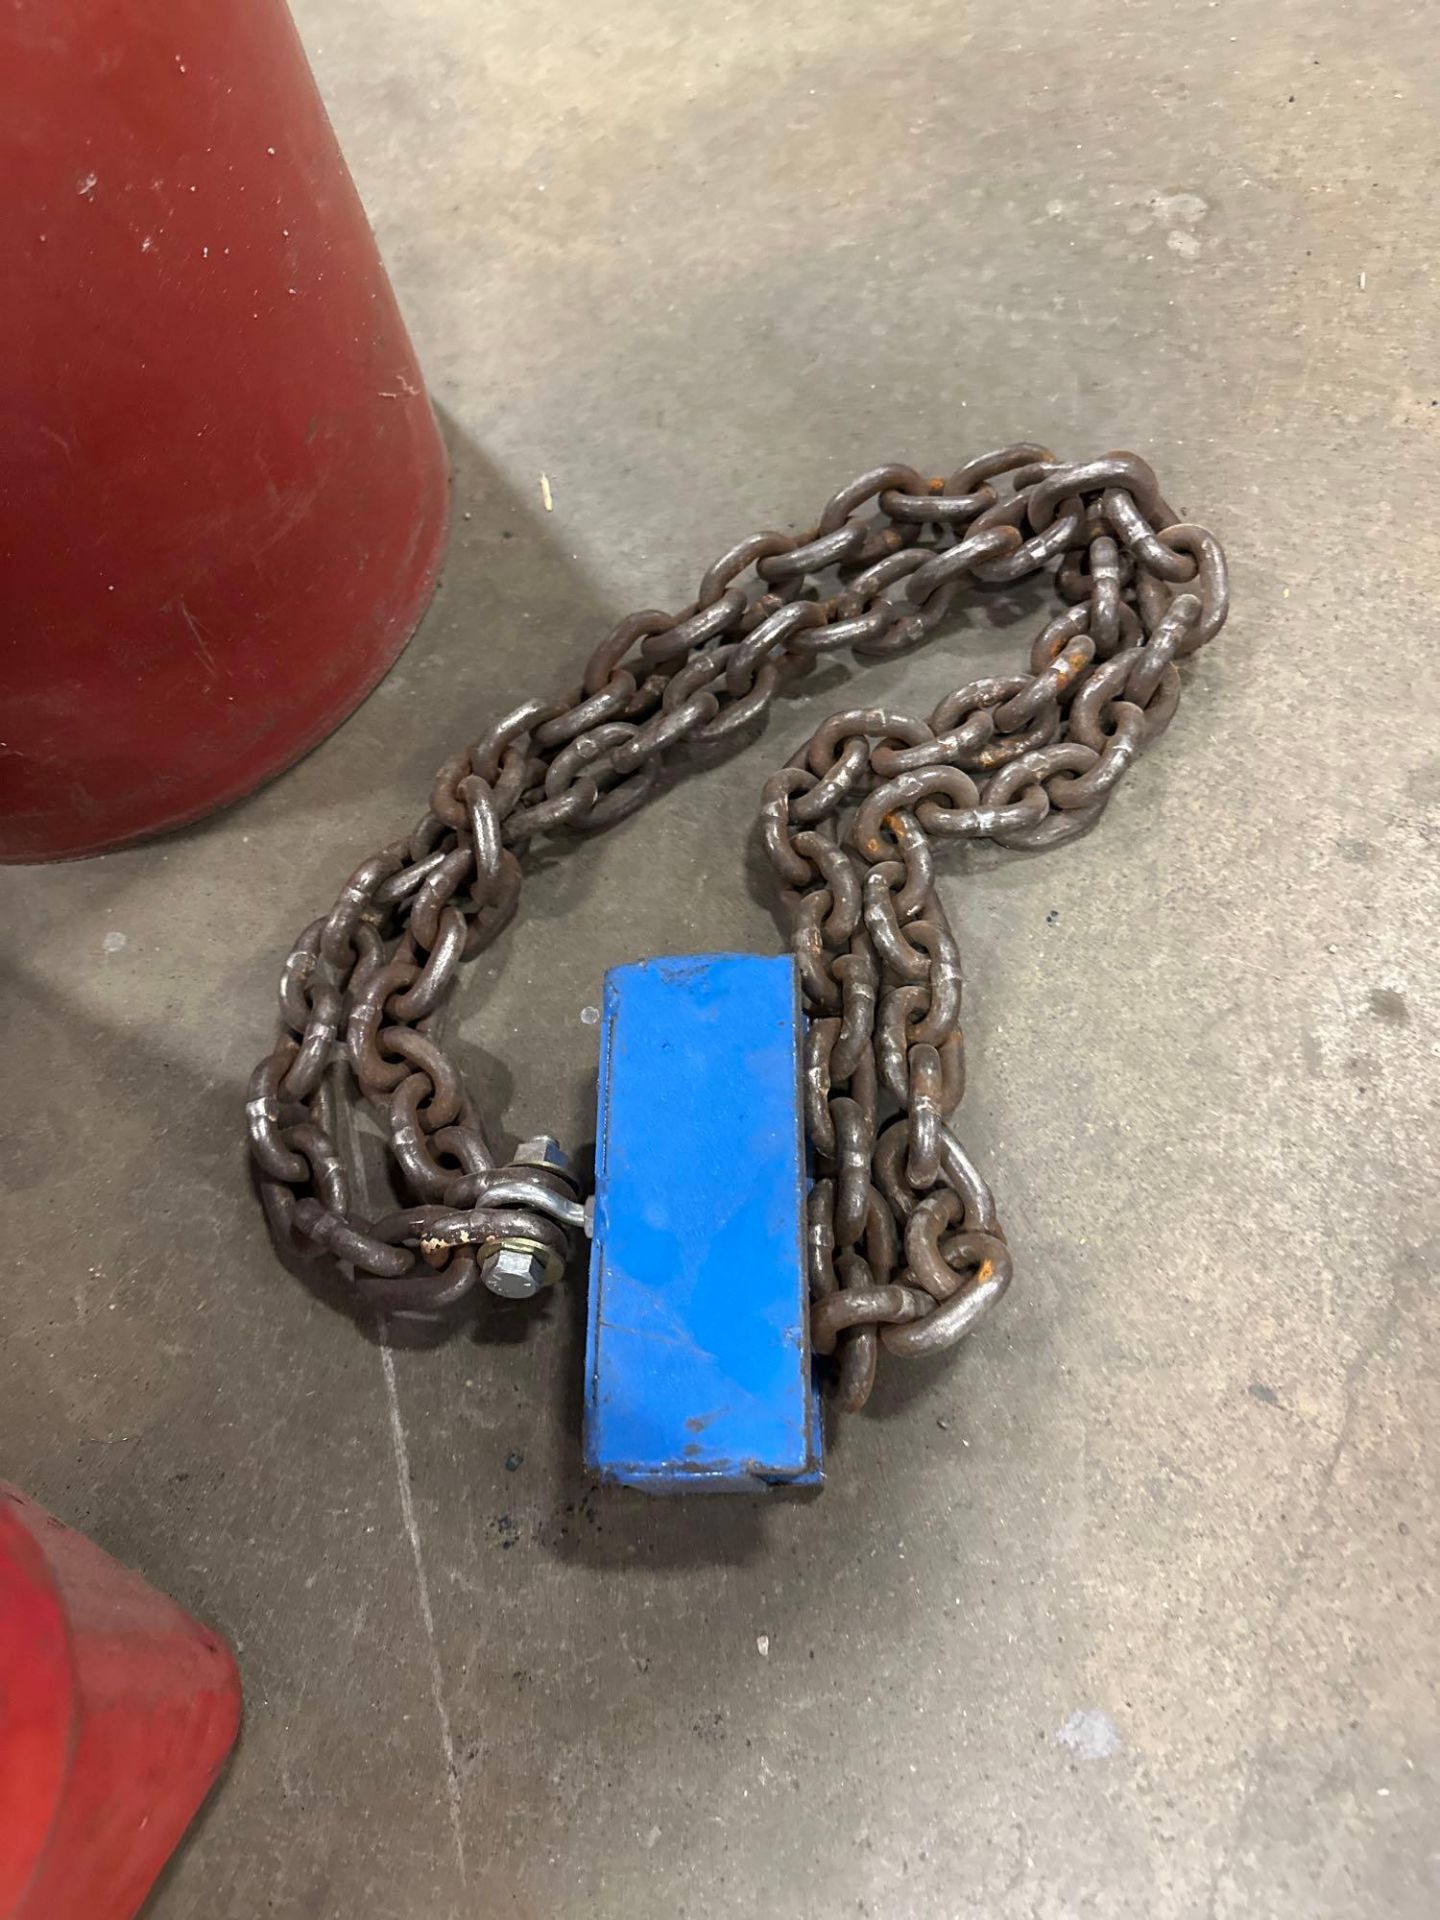 Lot of Asst. Magnetic Lifting Chain, Hoks, Shackles, Chains, etc. - Image 4 of 4